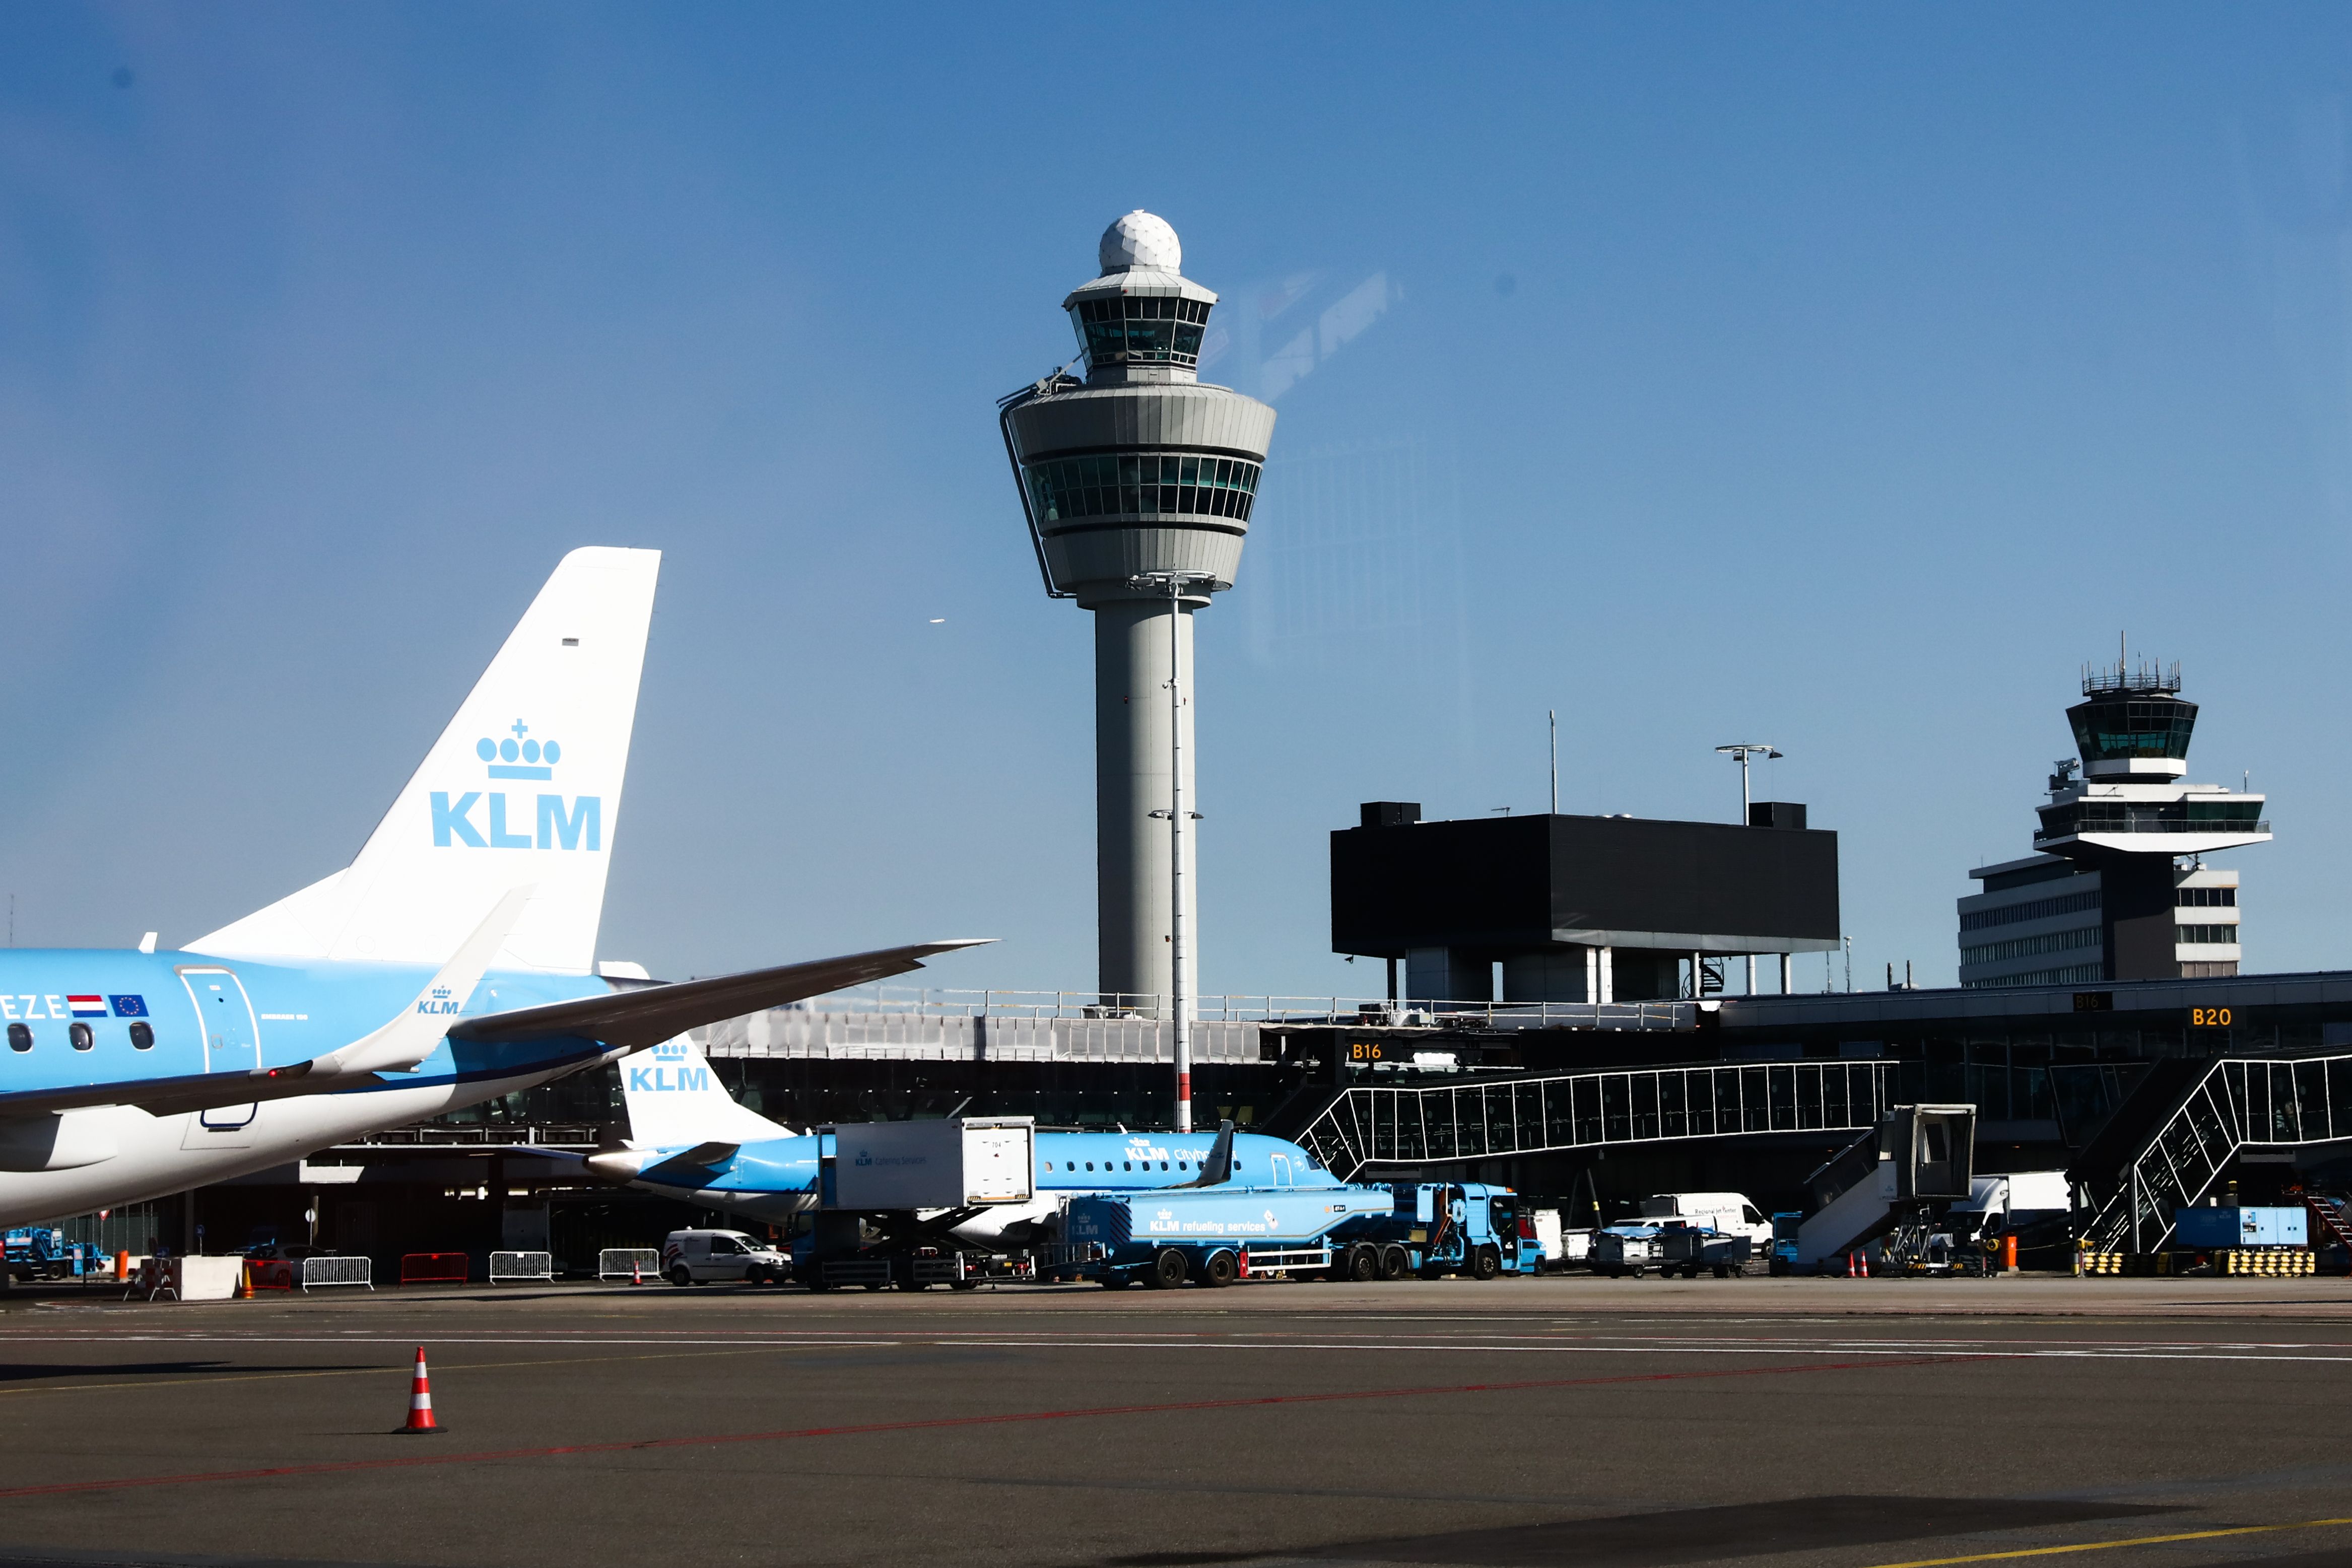 KLM aircraft at Amsterdam Schiphol Airport